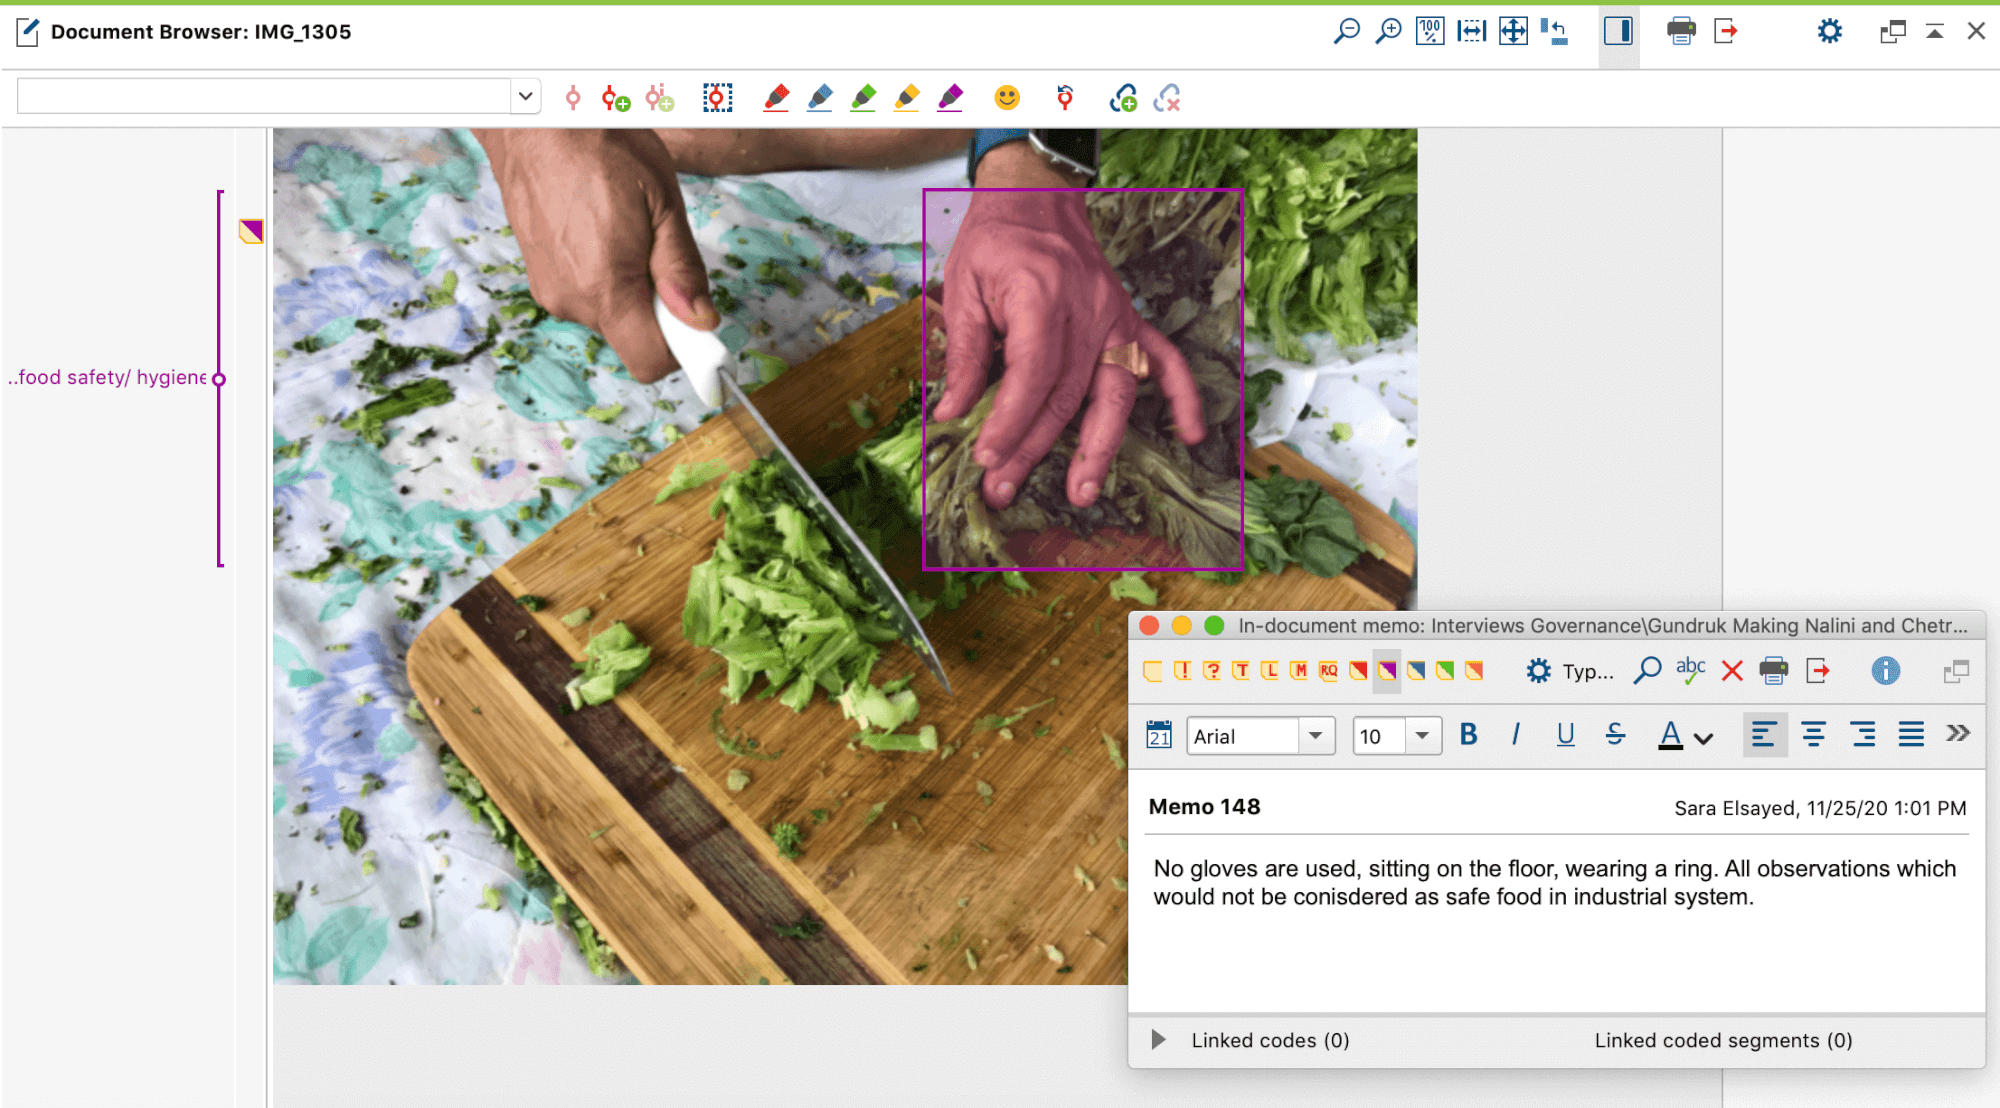 Figure 1: Screenshot from MAXQDA2020 showing the coding of an image of a person chopping herbs with a knife.